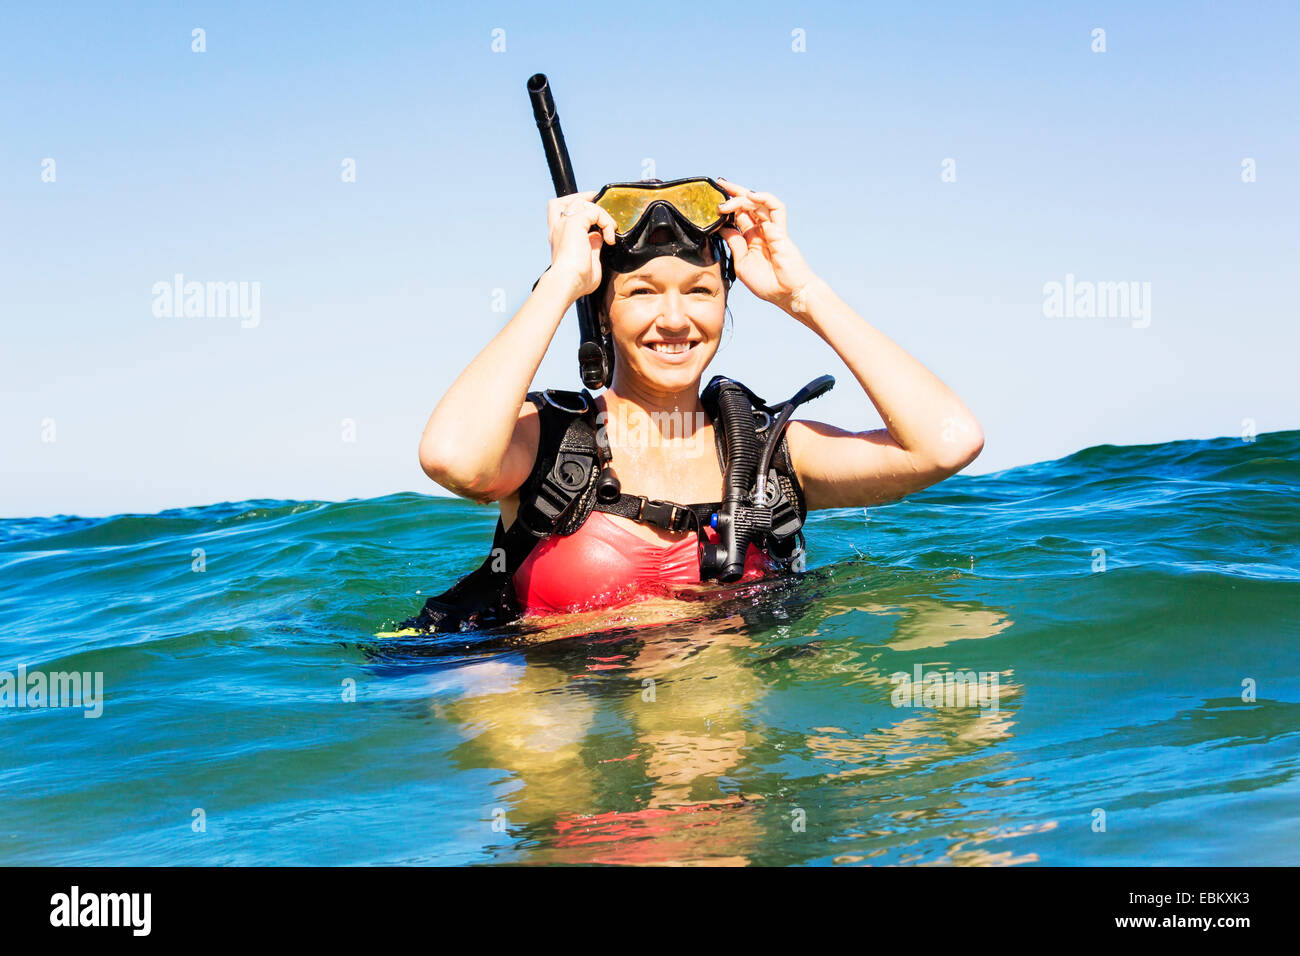 USA, Florida, Jupiter, Portrait of young woman scuba-diving in sea Stock Photo